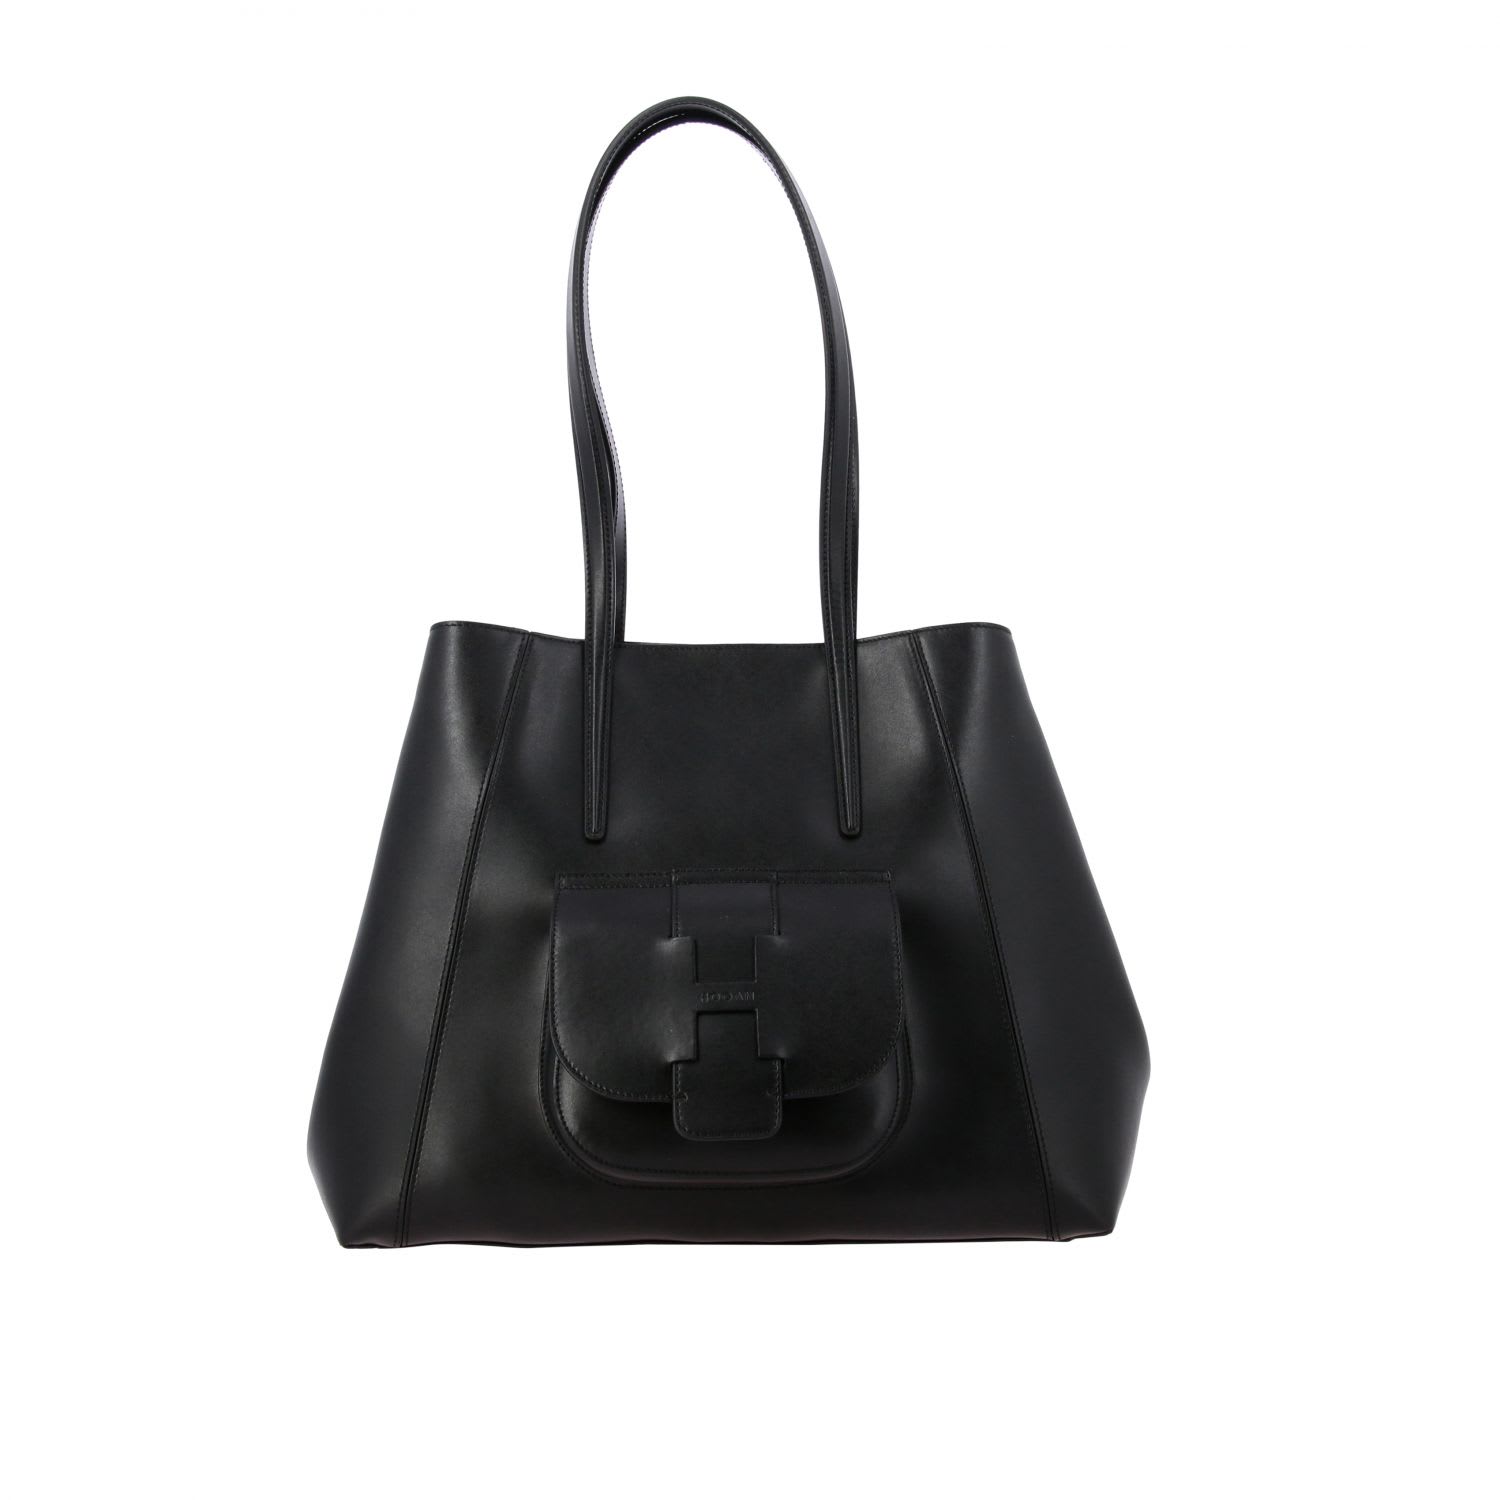 HOGAN SHOPPING BAG IN LEATHER WITH EXTERNAL POCKET AND LOGO,11244861